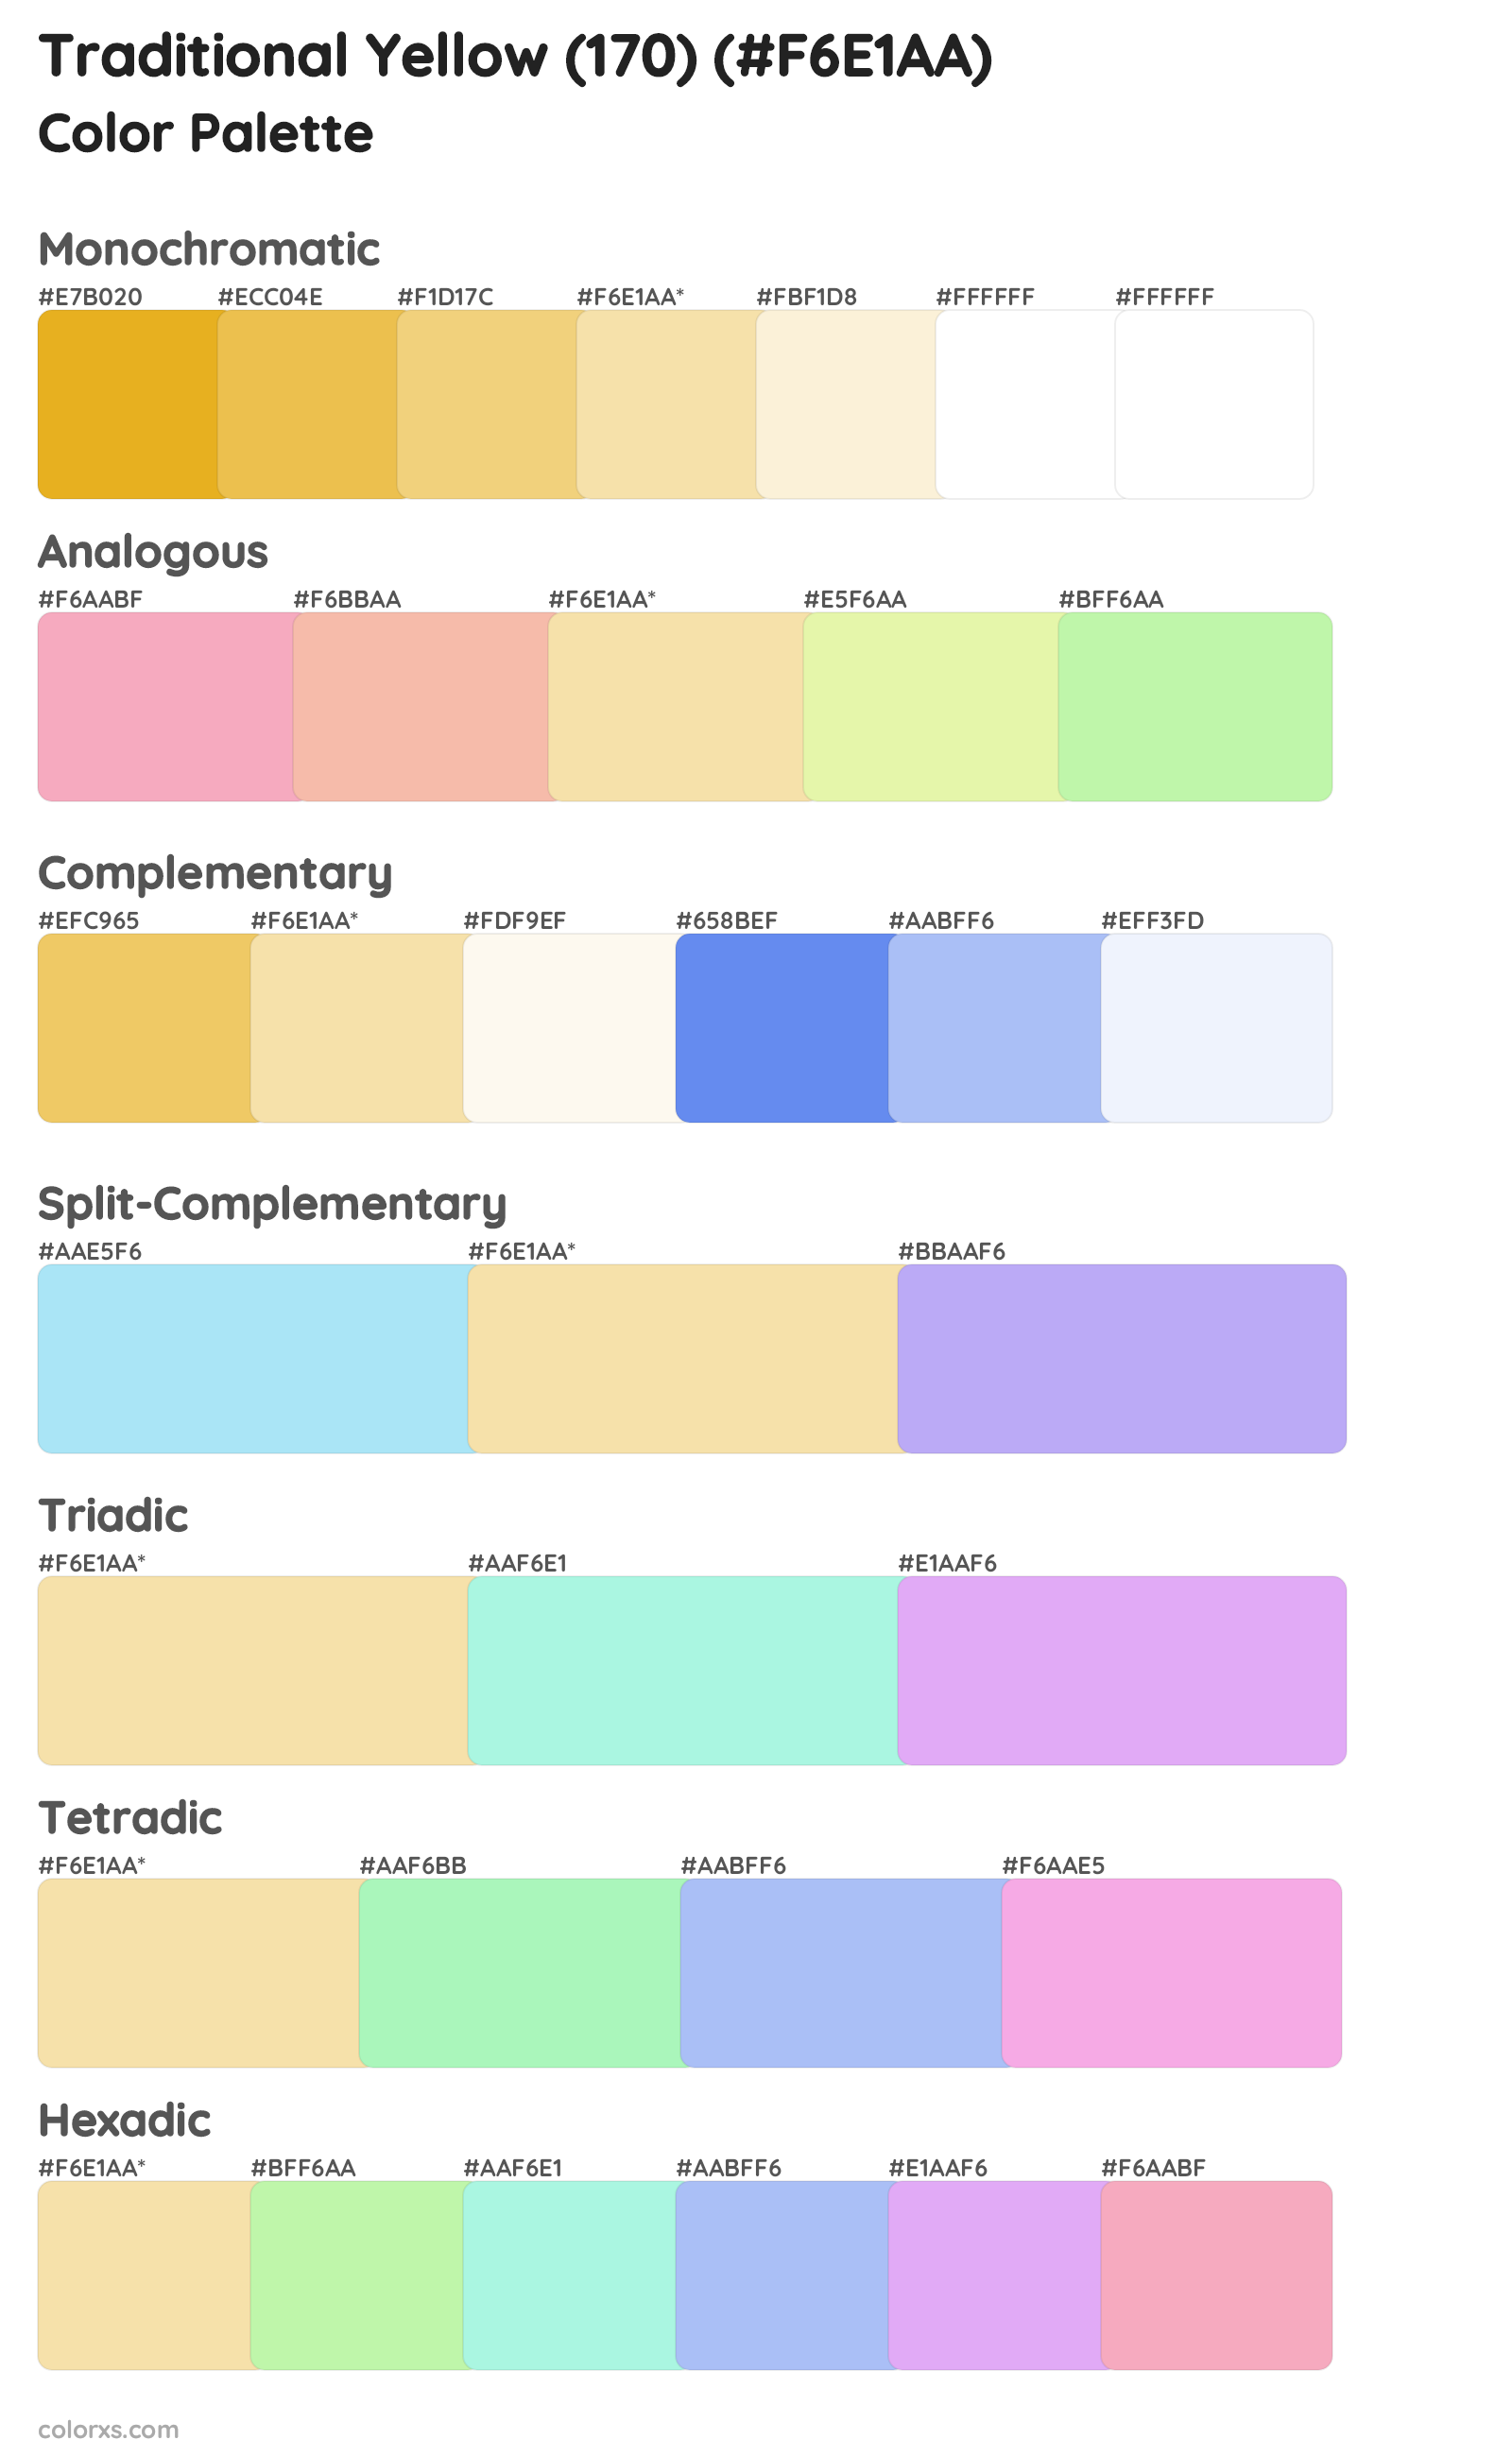 Traditional Yellow (170) Color Scheme Palettes